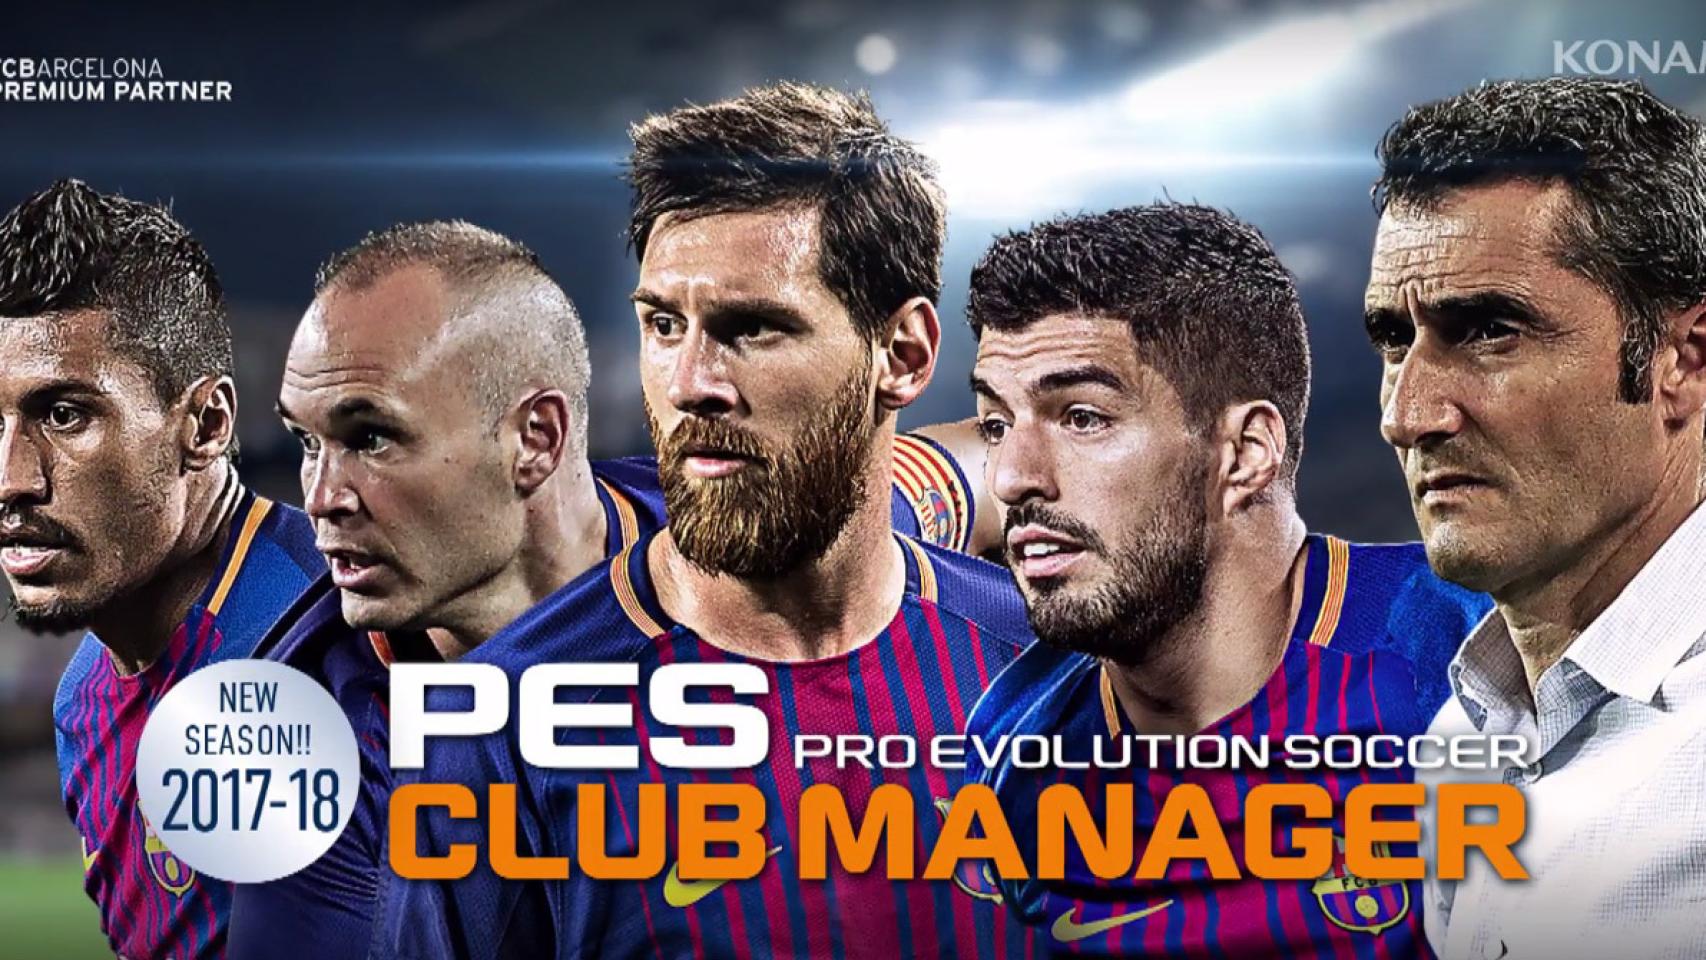 Pes manager. PES Club Manager. Goal! The Club Manager.